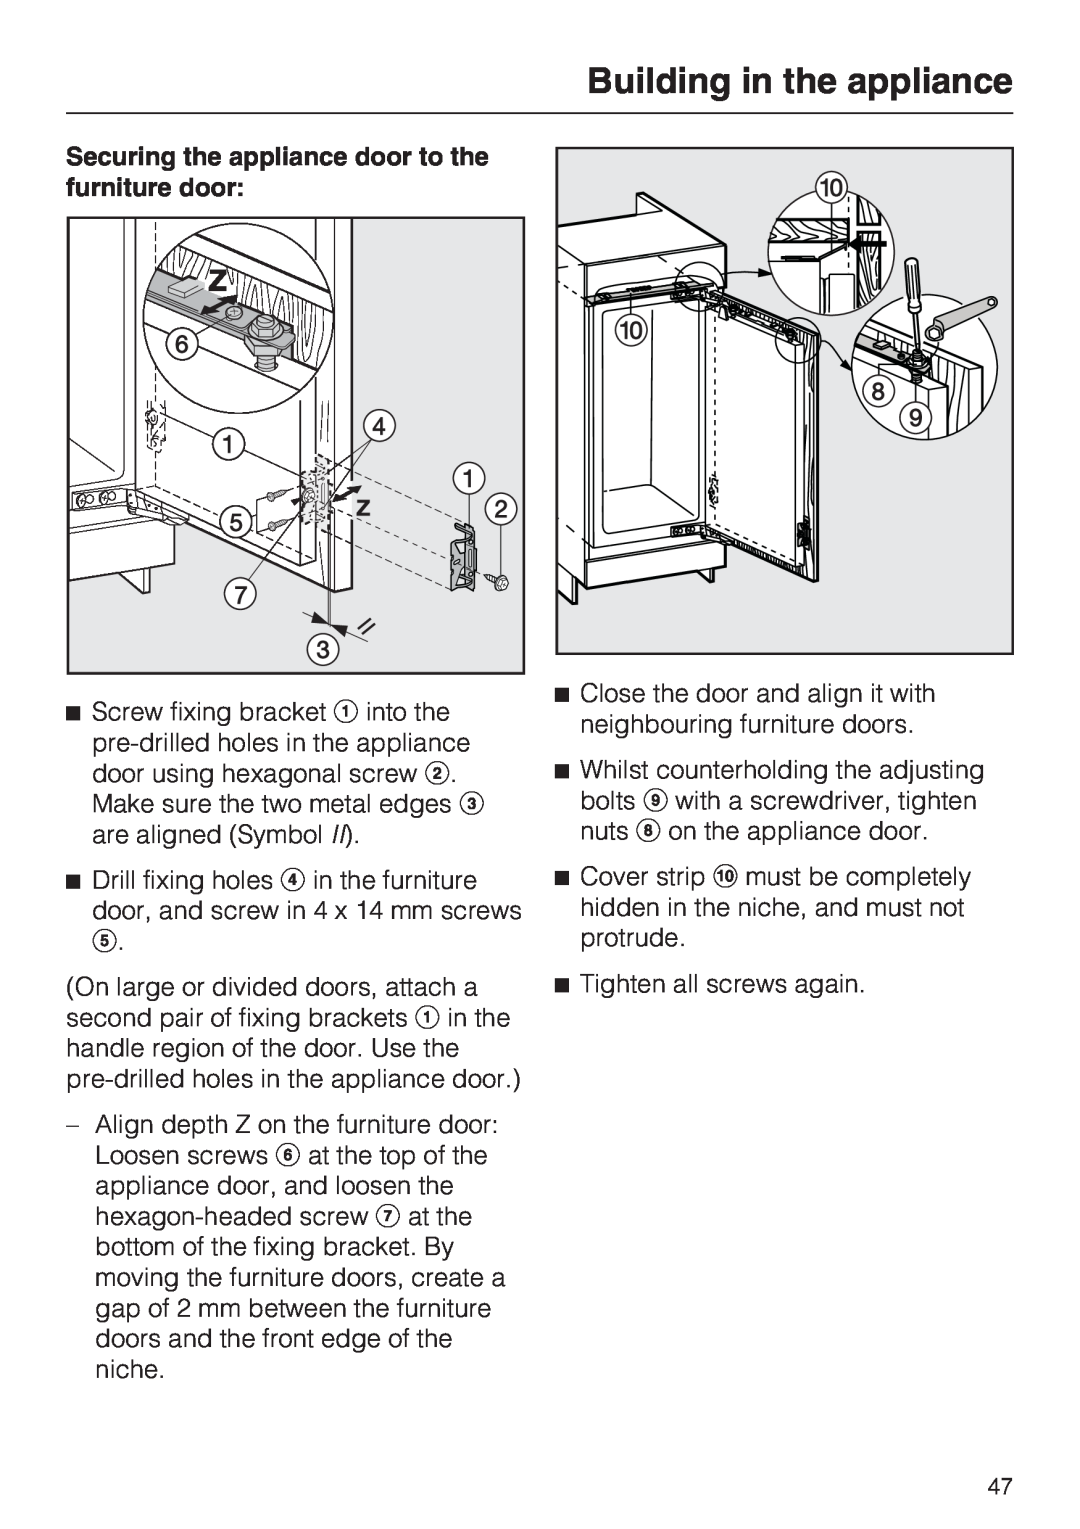 Miele K9552, K9752 installation instructions Securing the appliance door to the furniture door, Building in the appliance 